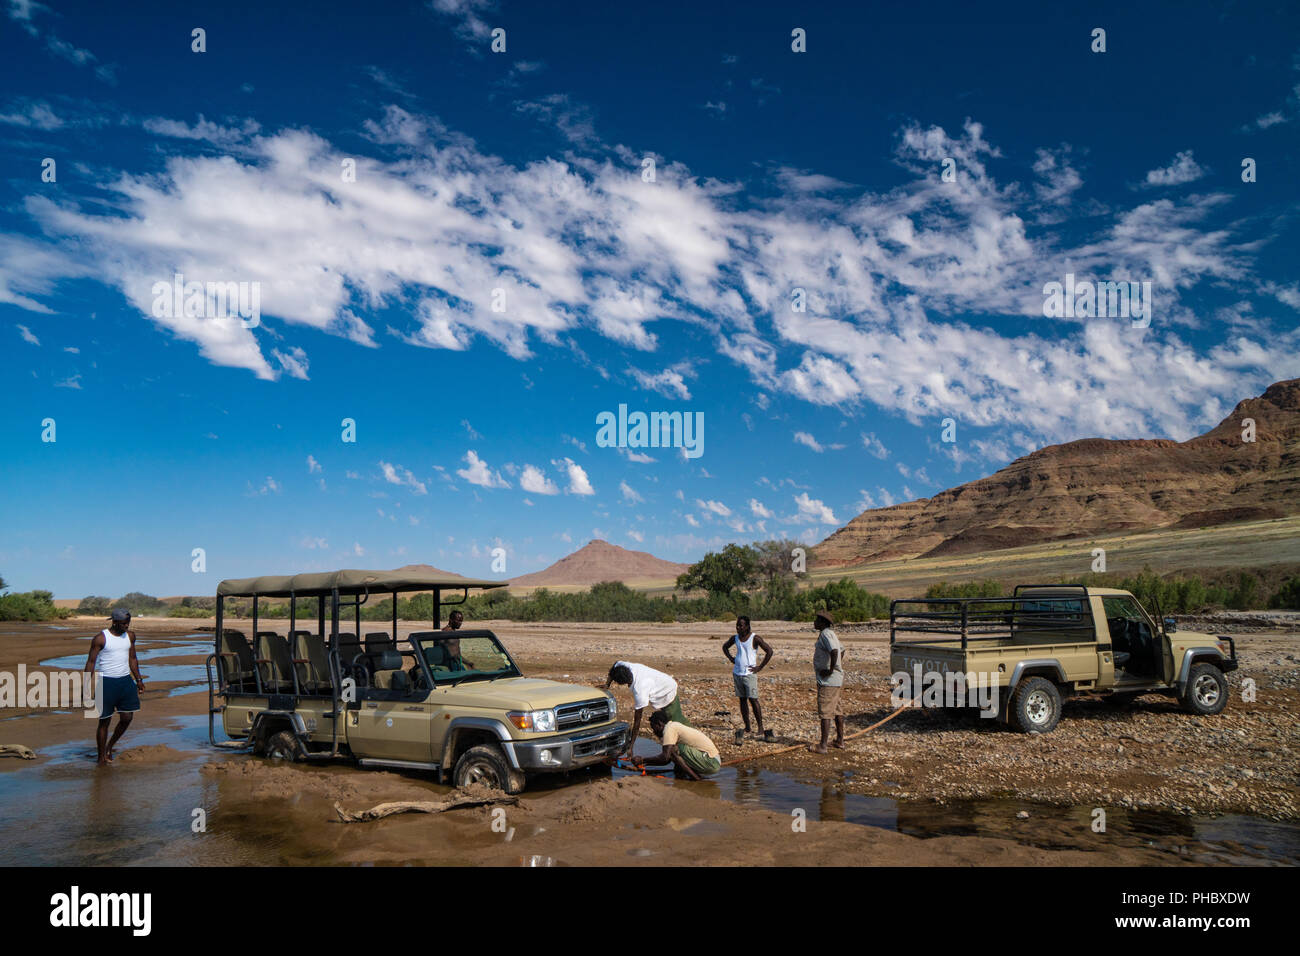 Rescuing safari vehicle stuck in sand of Hoarusib Riverbed, mountain range in background, Puros, north of Sesfontein, Namibia, Africa Stock Photo